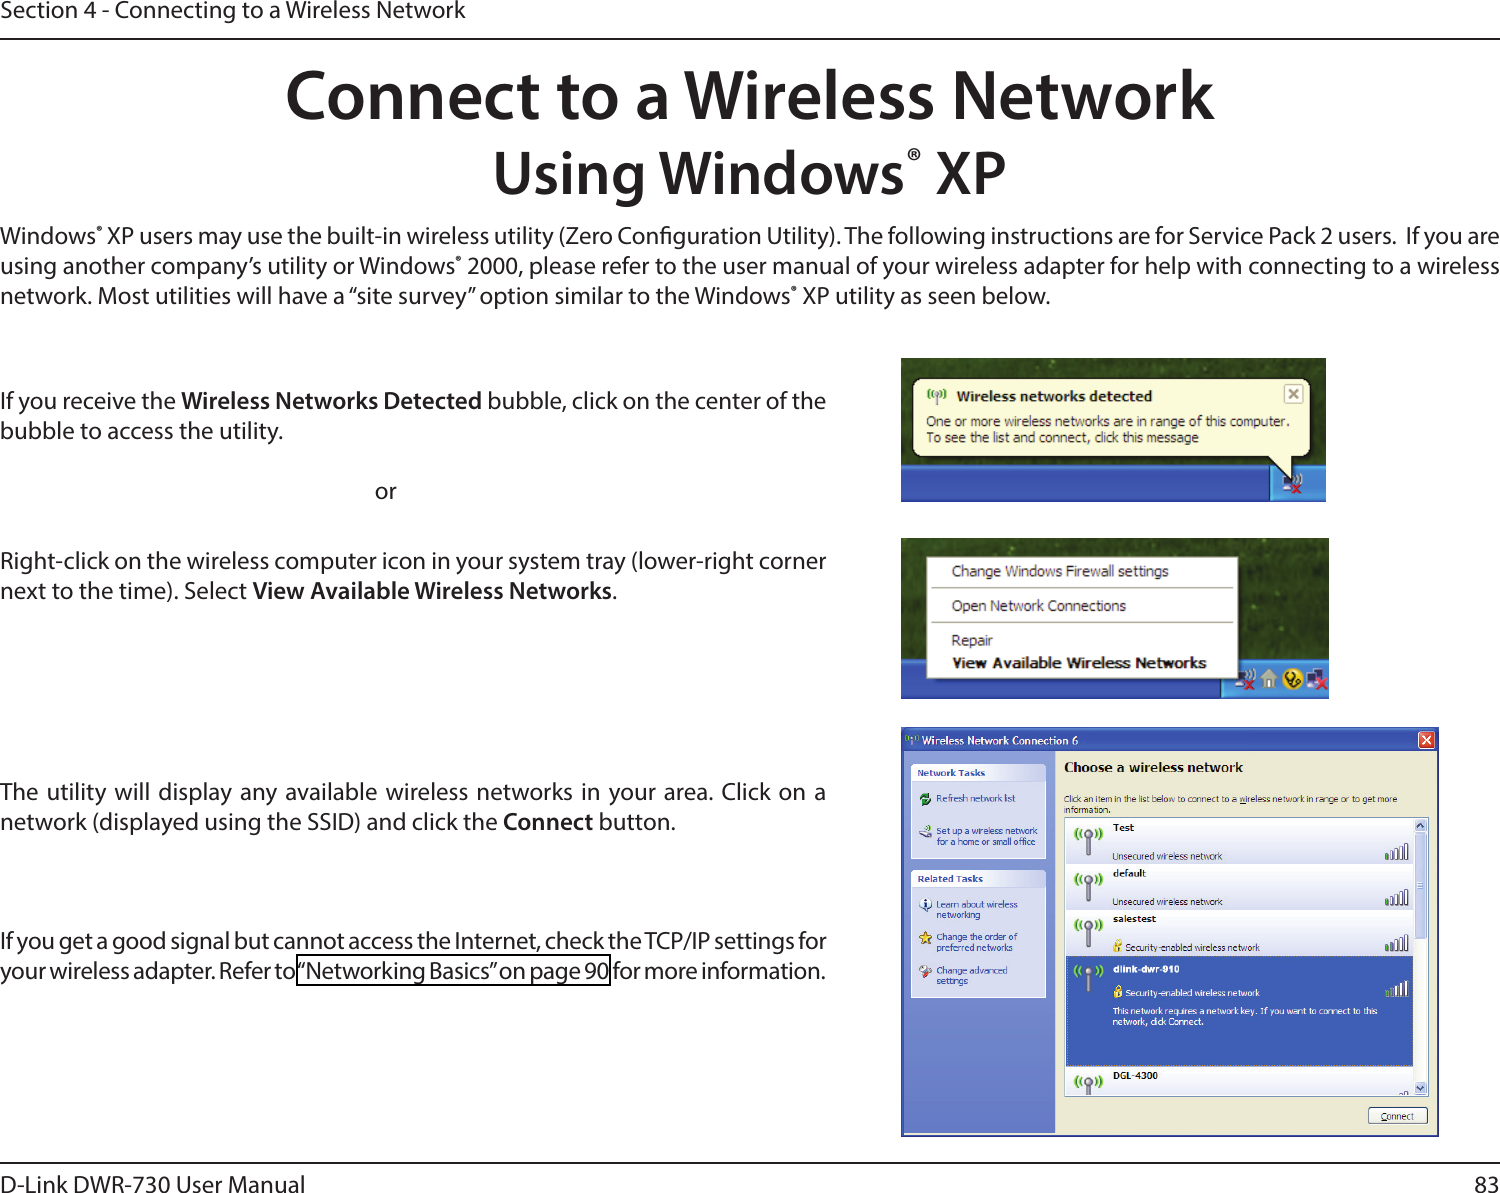 83D-Link DWR-730 User ManualSection 4 - Connecting to a Wireless NetworkConnect to a Wireless NetworkUsing Windows® XPWindows® XP users may use the built-in wireless utility (Zero Conguration Utility). The following instructions are for Service Pack 2 users.  If you are using another company’s utility or Windows® 2000, please refer to the user manual of your wireless adapter for help with connecting to a wireless network. Most utilities will have a “site survey” option similar to the Windows® XP utility as seen below.Right-click on the wireless computer icon in your system tray (lower-right corner next to the time). Select View Available Wireless Networks.If you receive the Wireless Networks Detected bubble, click on the center of the bubble to access the utility.     orThe utility will display any available wireless networks in your area. Click on a network (displayed using the SSID) and click the Connect button.If you get a good signal but cannot access the Internet, check the TCP/IP settings for your wireless adapter. Refer to “Networking Basics” on page 90 for more information.